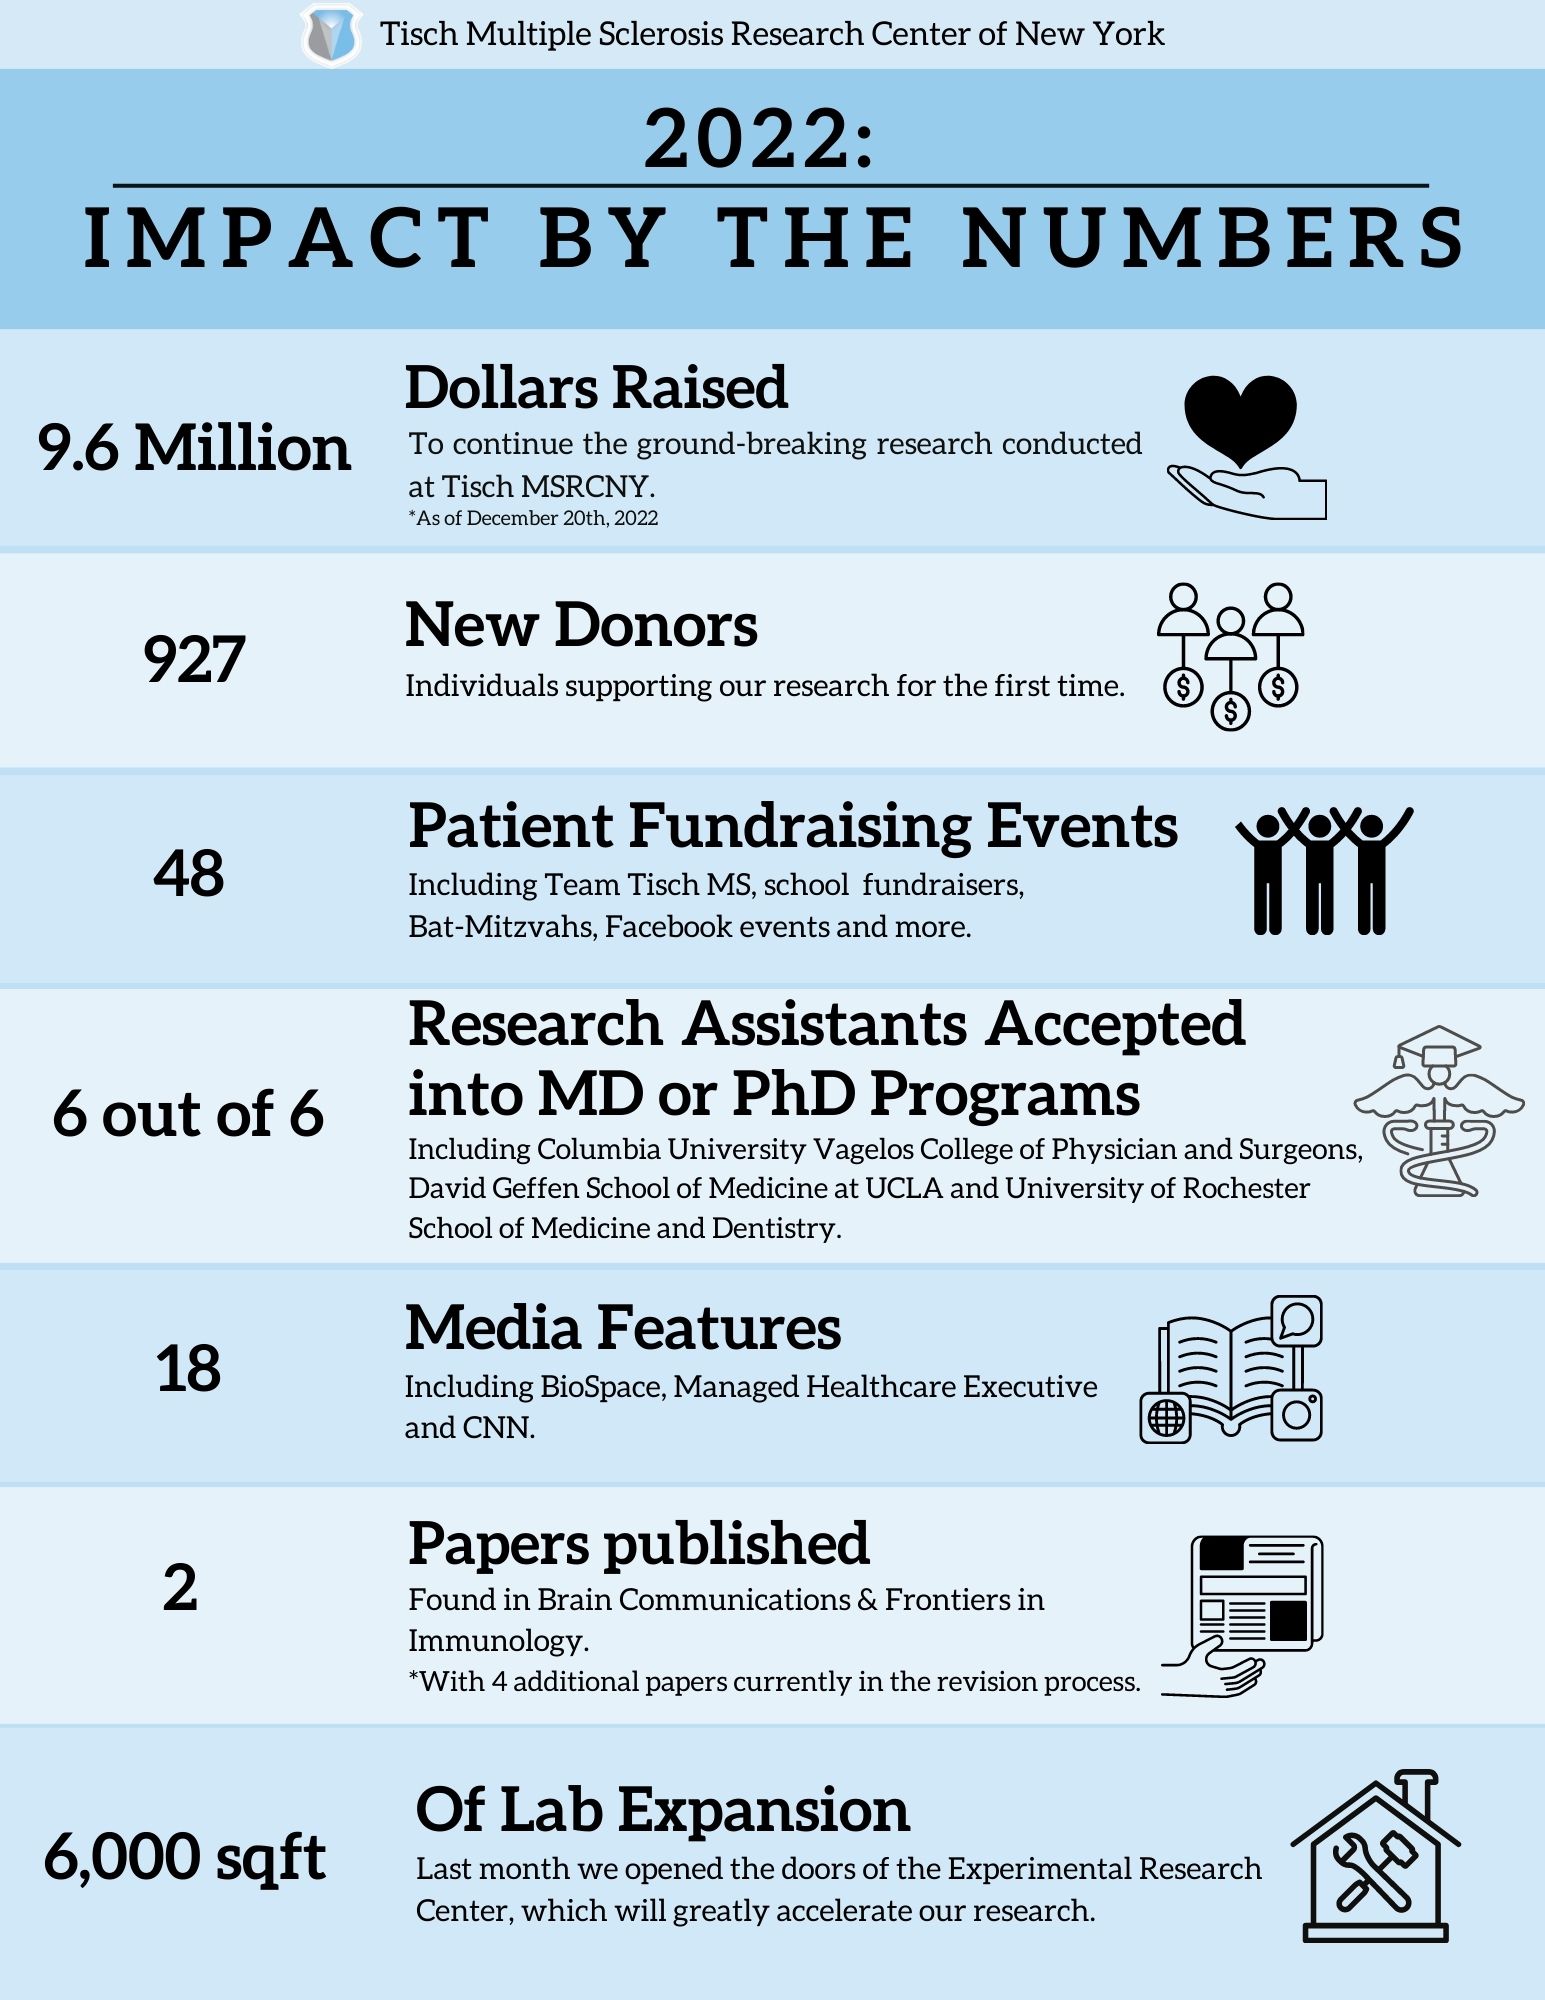 Impact by the Numbers